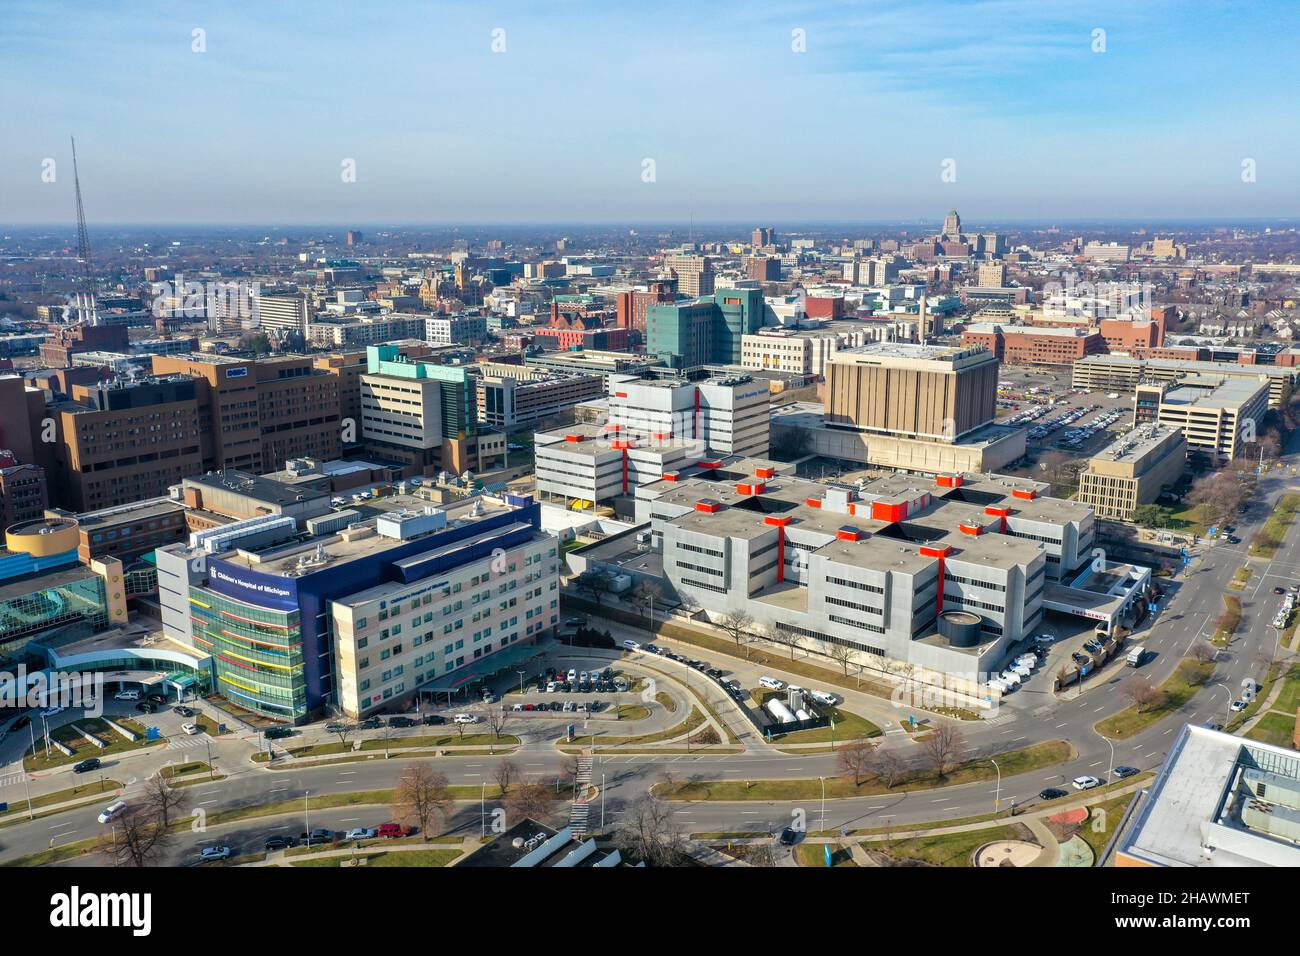 Detroit, Michigan - The Detroit Medical Center, a collection of hospitals operated by Tenet Healthcare. It is the largest health care provider in sout Stock Photo